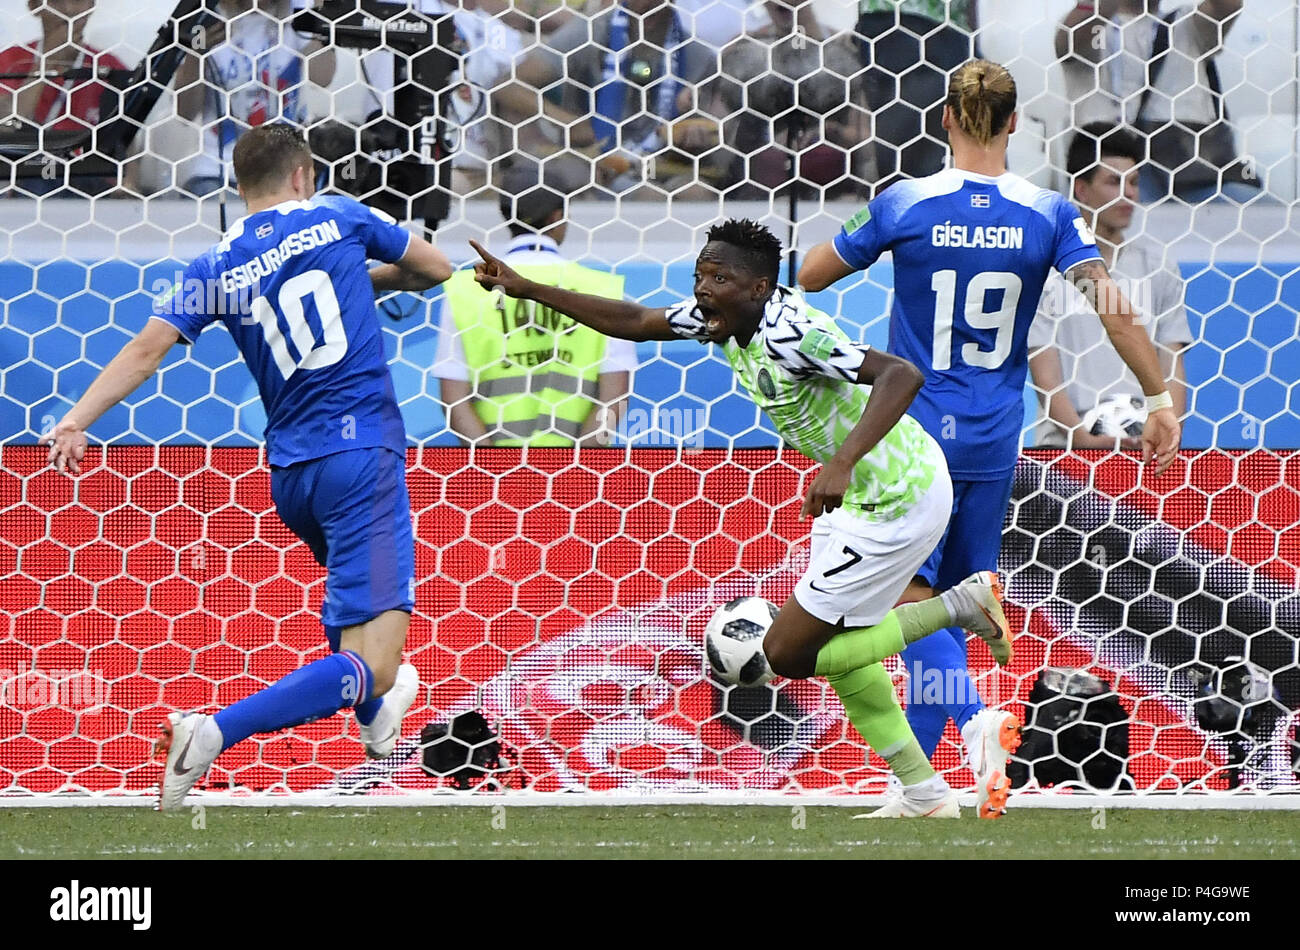 Volgograd, Russia. 22nd June, 2018. Ahmed Musa (C) of Nigeria celebrates scoring during the 2018 FIFA World Cup Group D match between Nigeria and Iceland in Volgograd, Russia, June 22, 2018. Credit: He Canling/Xinhua/Alamy Live News Stock Photo